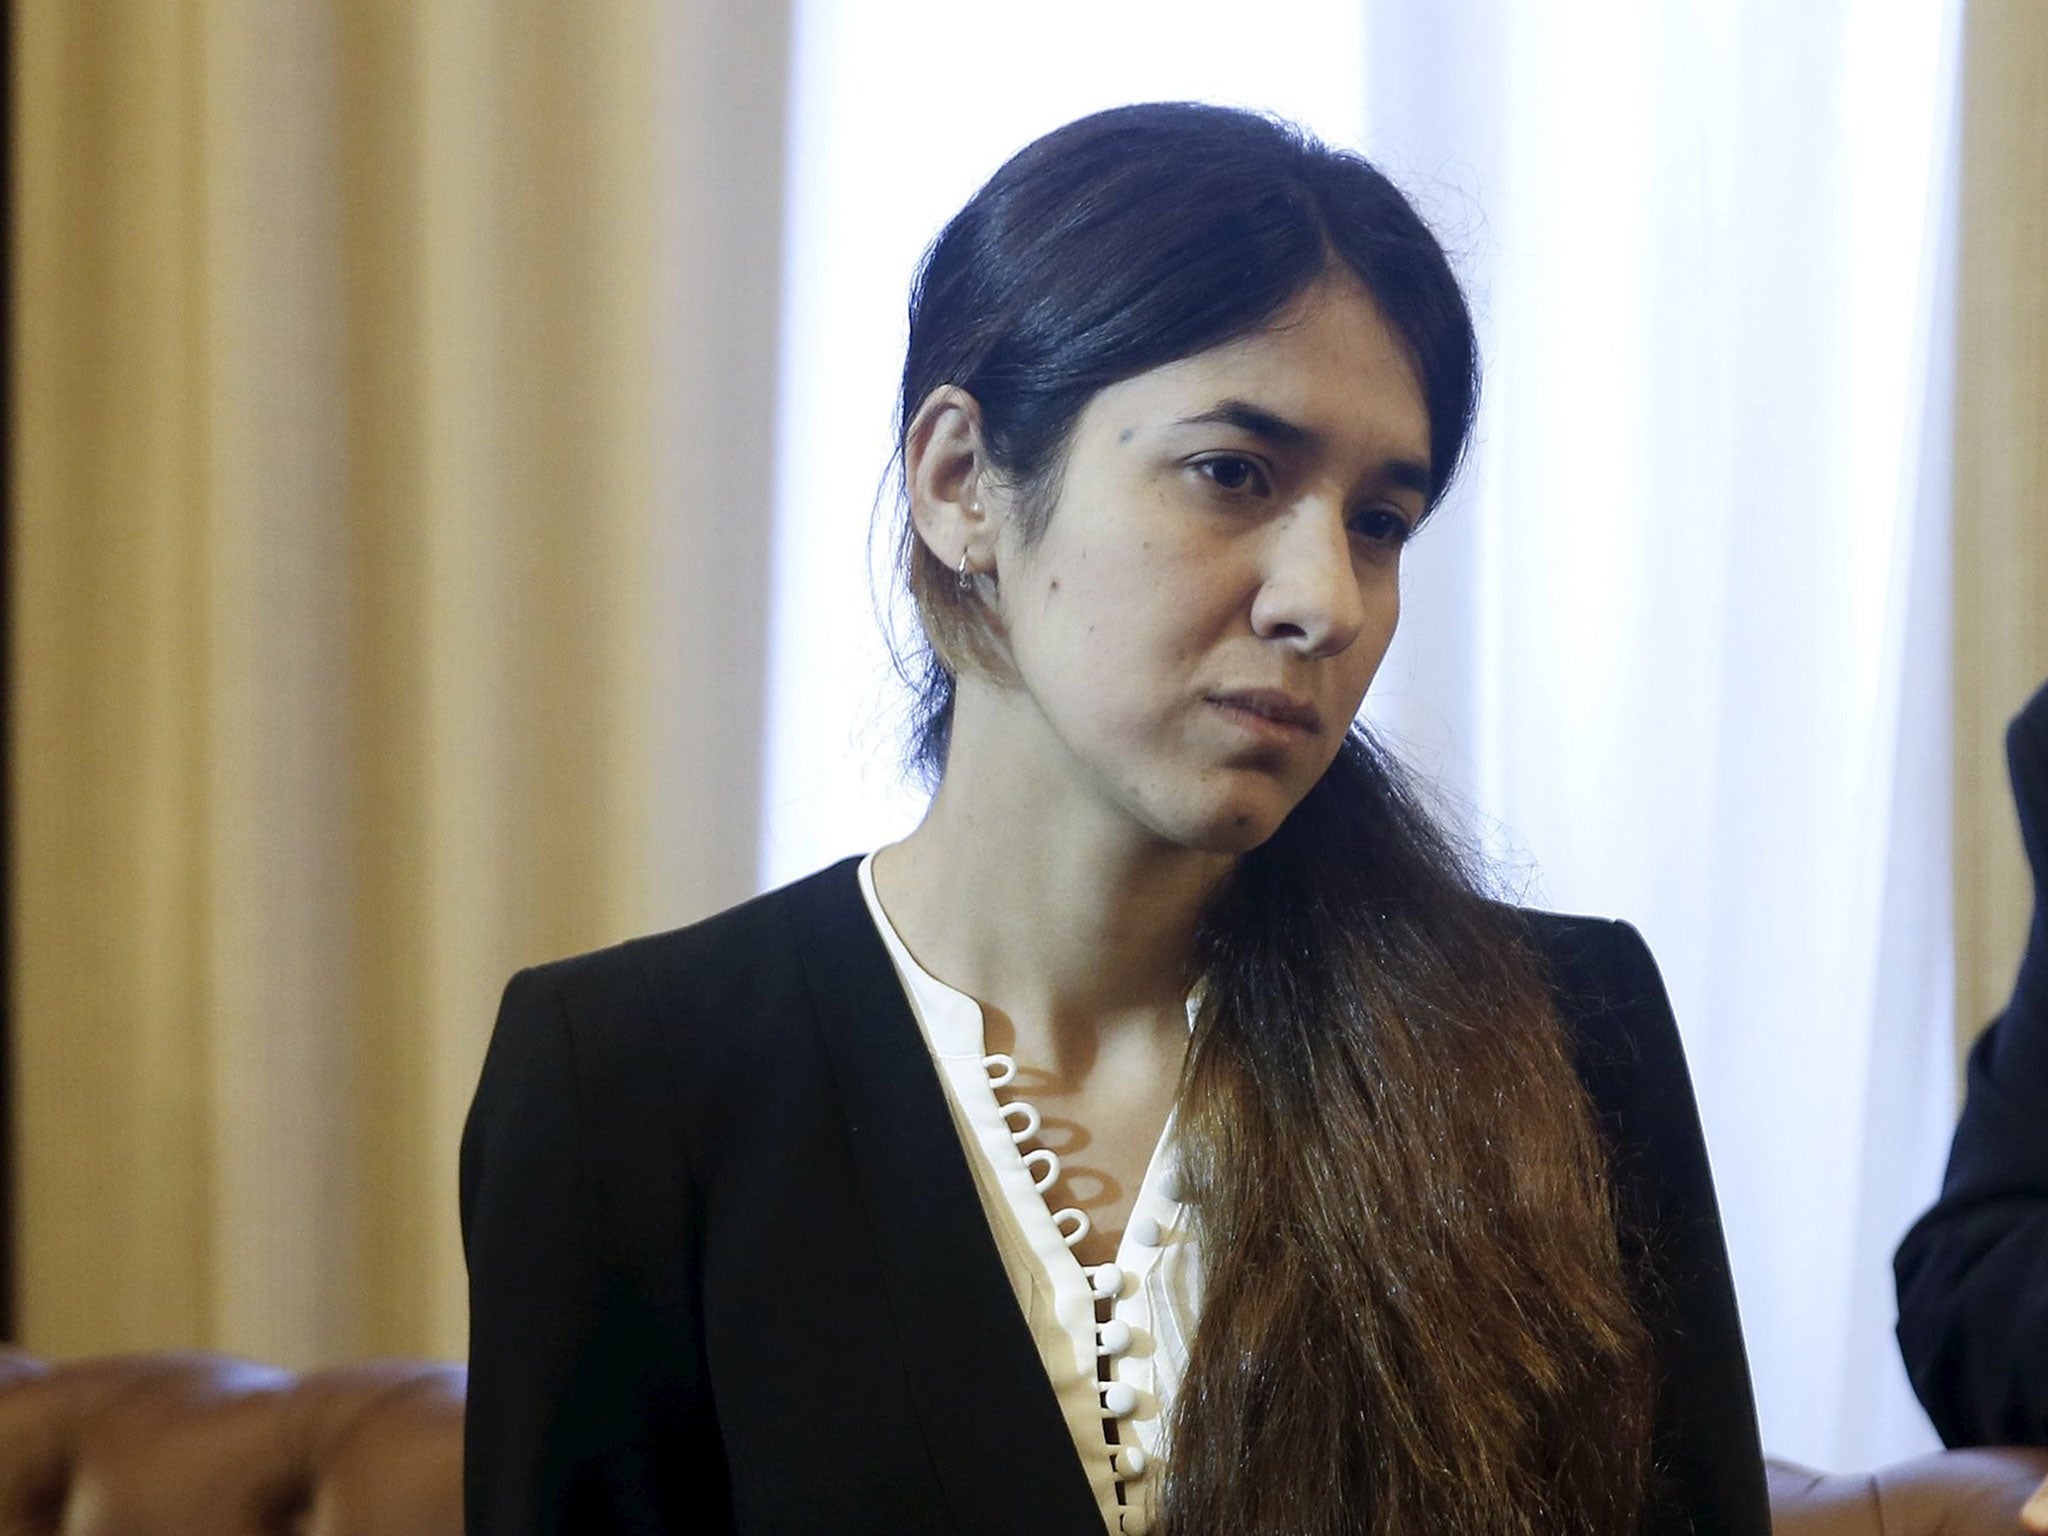 Nadia Murad meets with the Greek President in Athens on 30 December, 2015